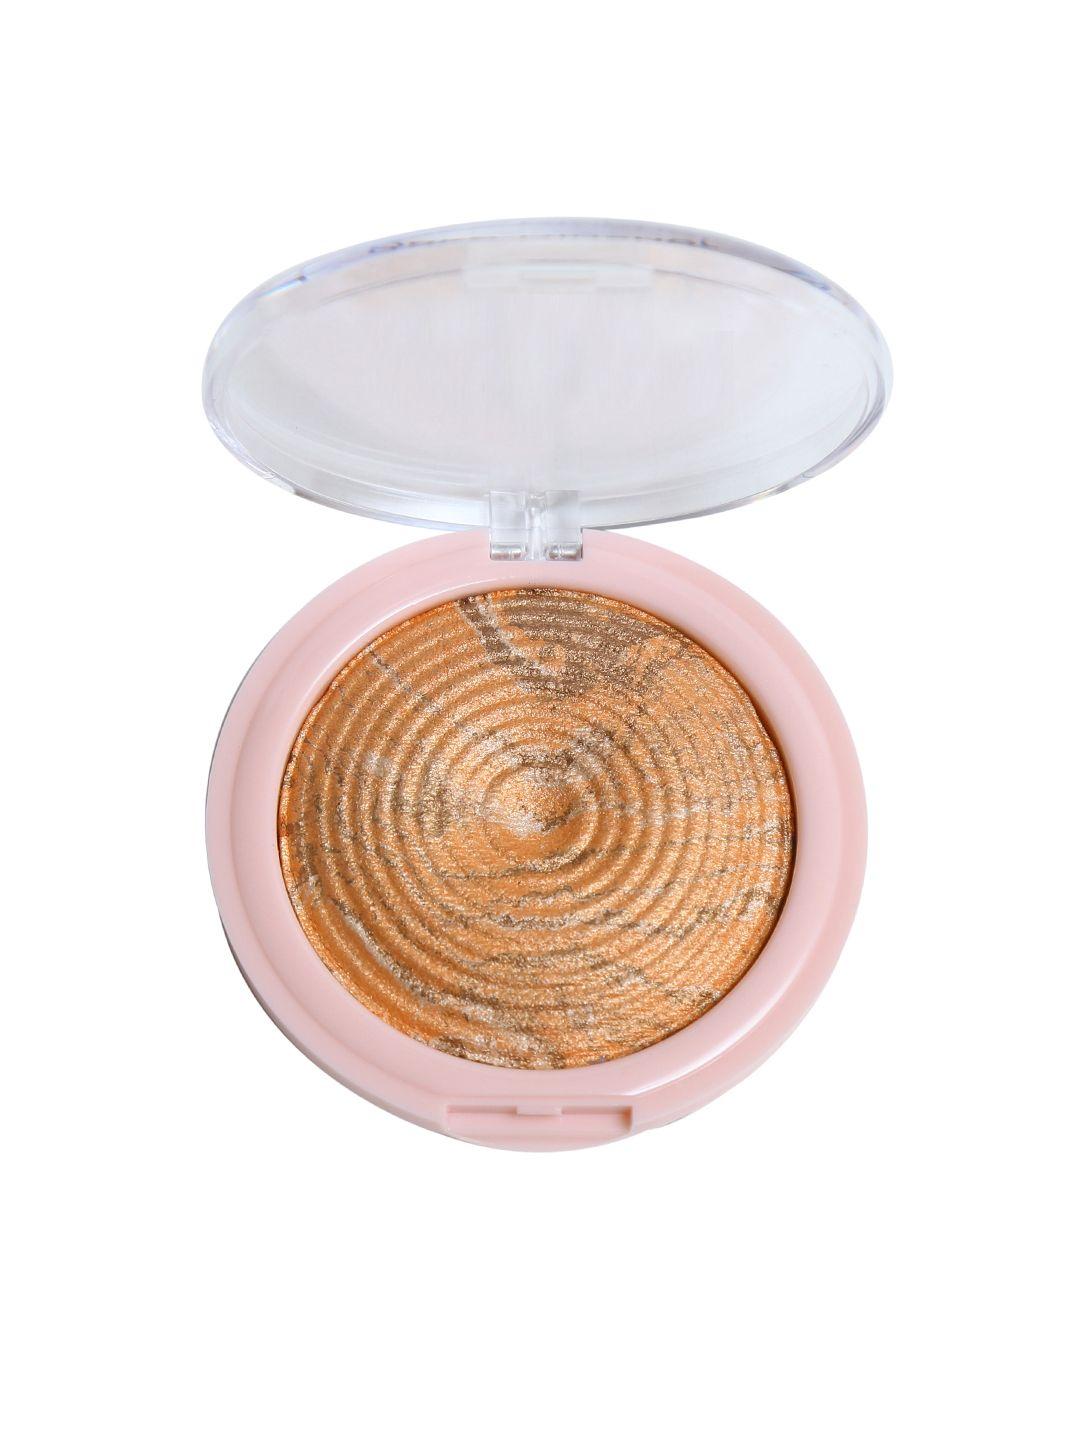 miss claire 08 baked blusher 8g